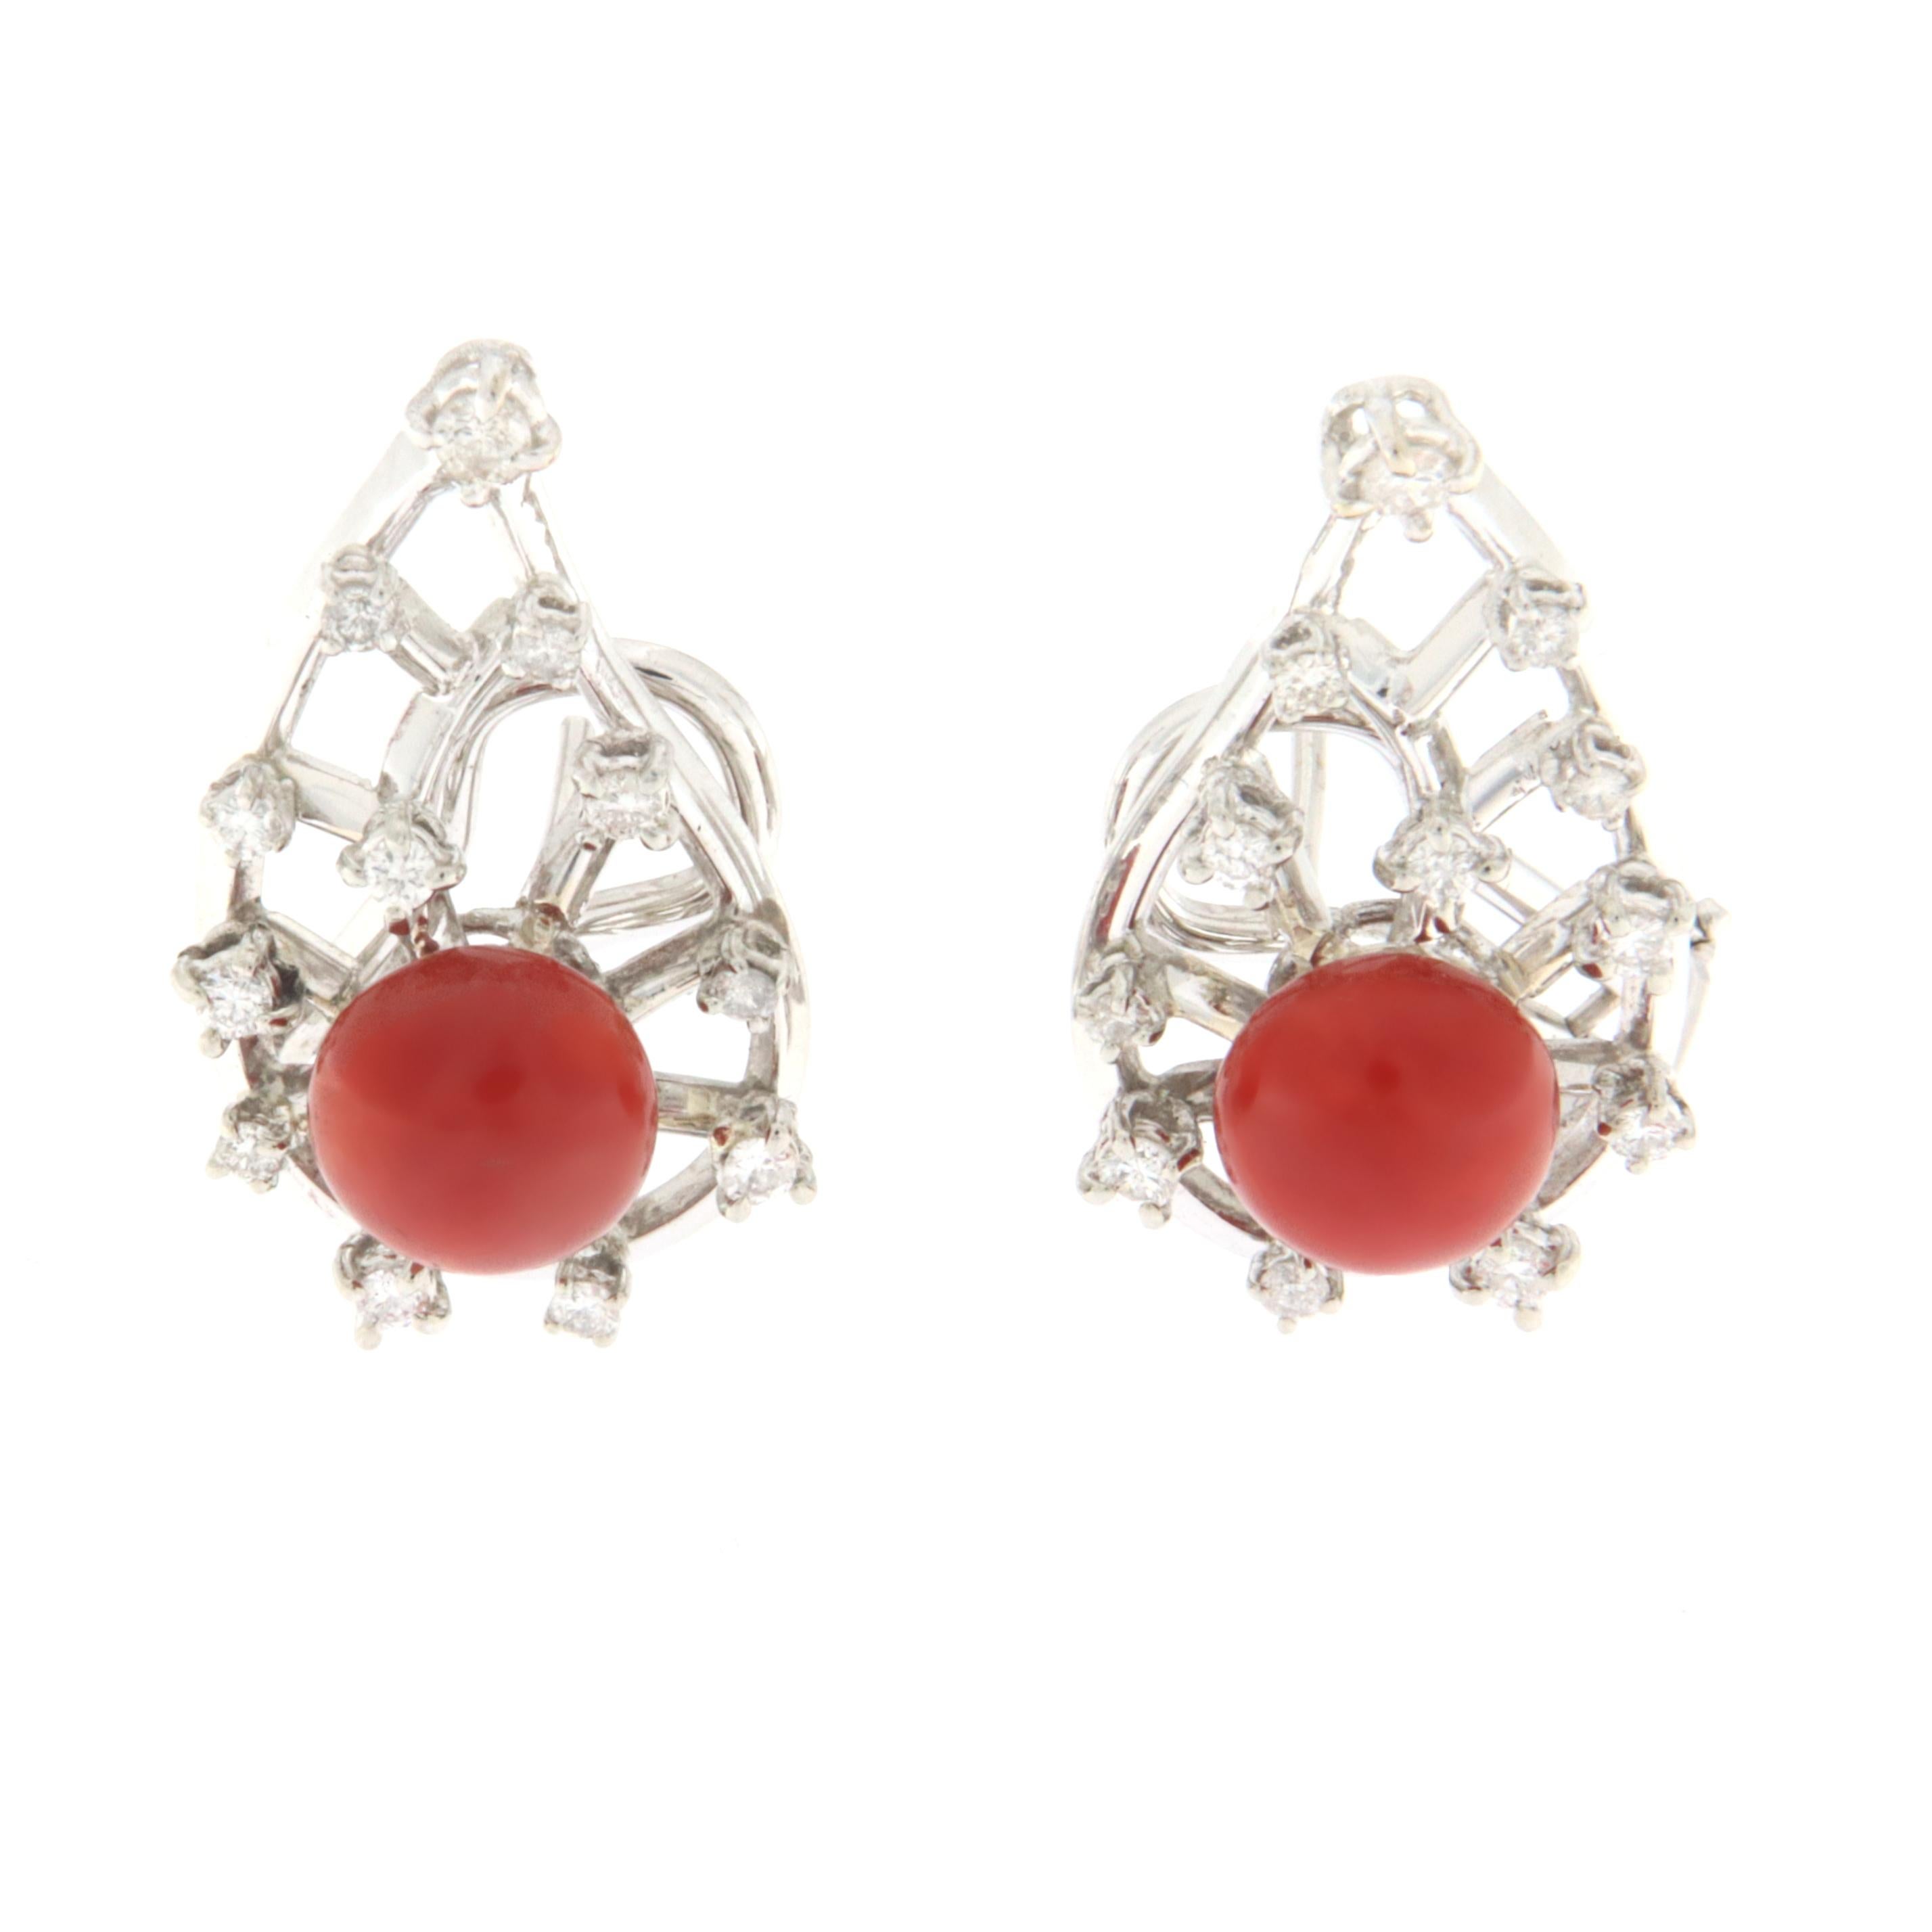 Beautiful earrings 18 karat white gold mounted with Sardinian coral buttons and diamonds.
Earrings created by our craftsmen.

Earrings total weight 9.30 grams
Diamonds weight 0.53 karat 
Coral weight 1 grams